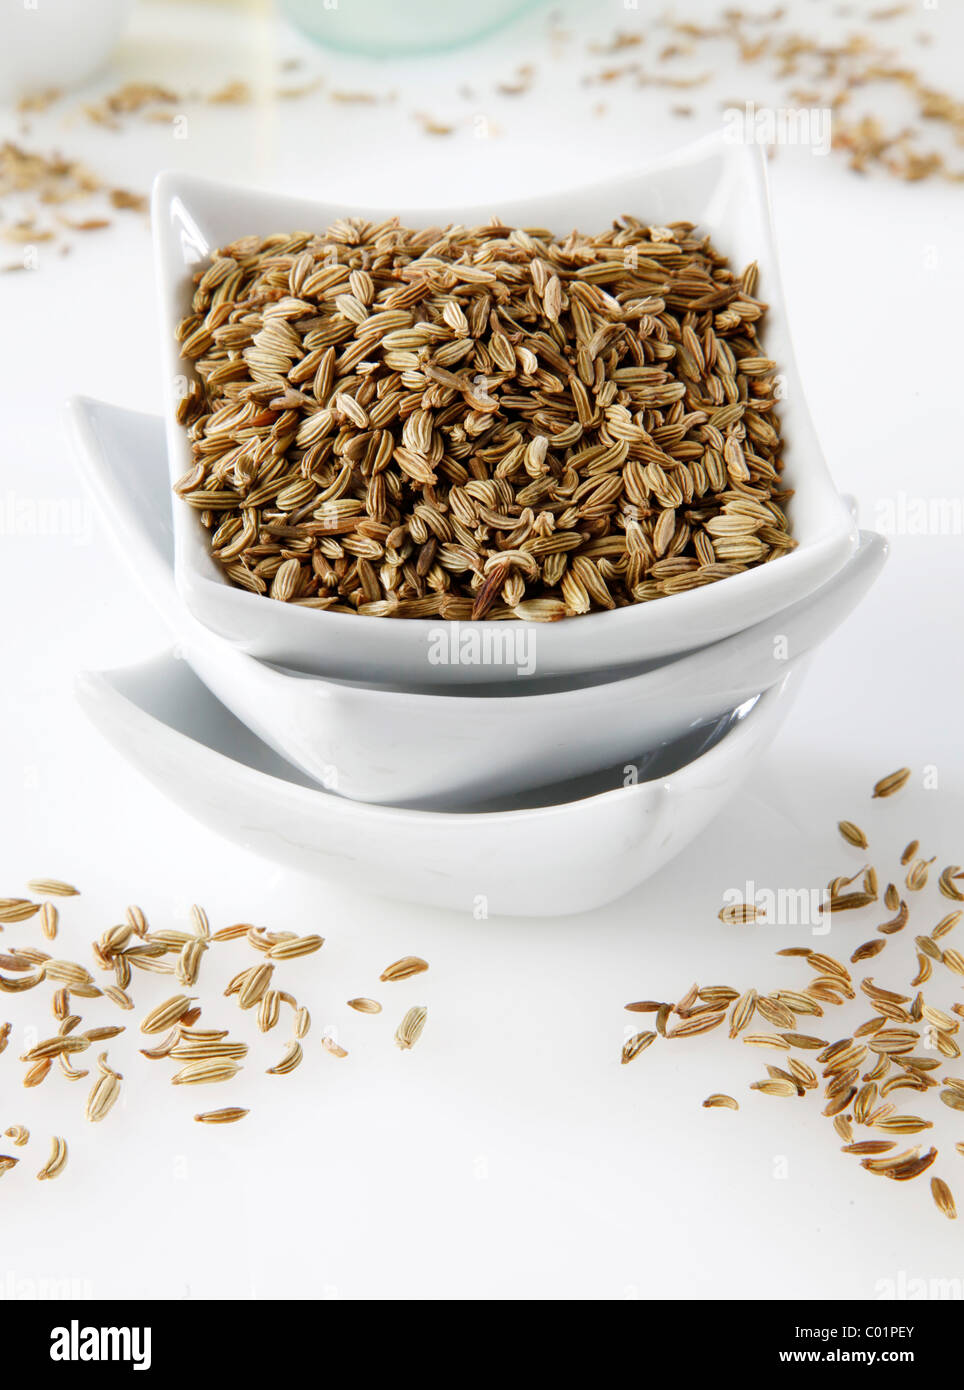 FENNEL SEEDS Stock Photo